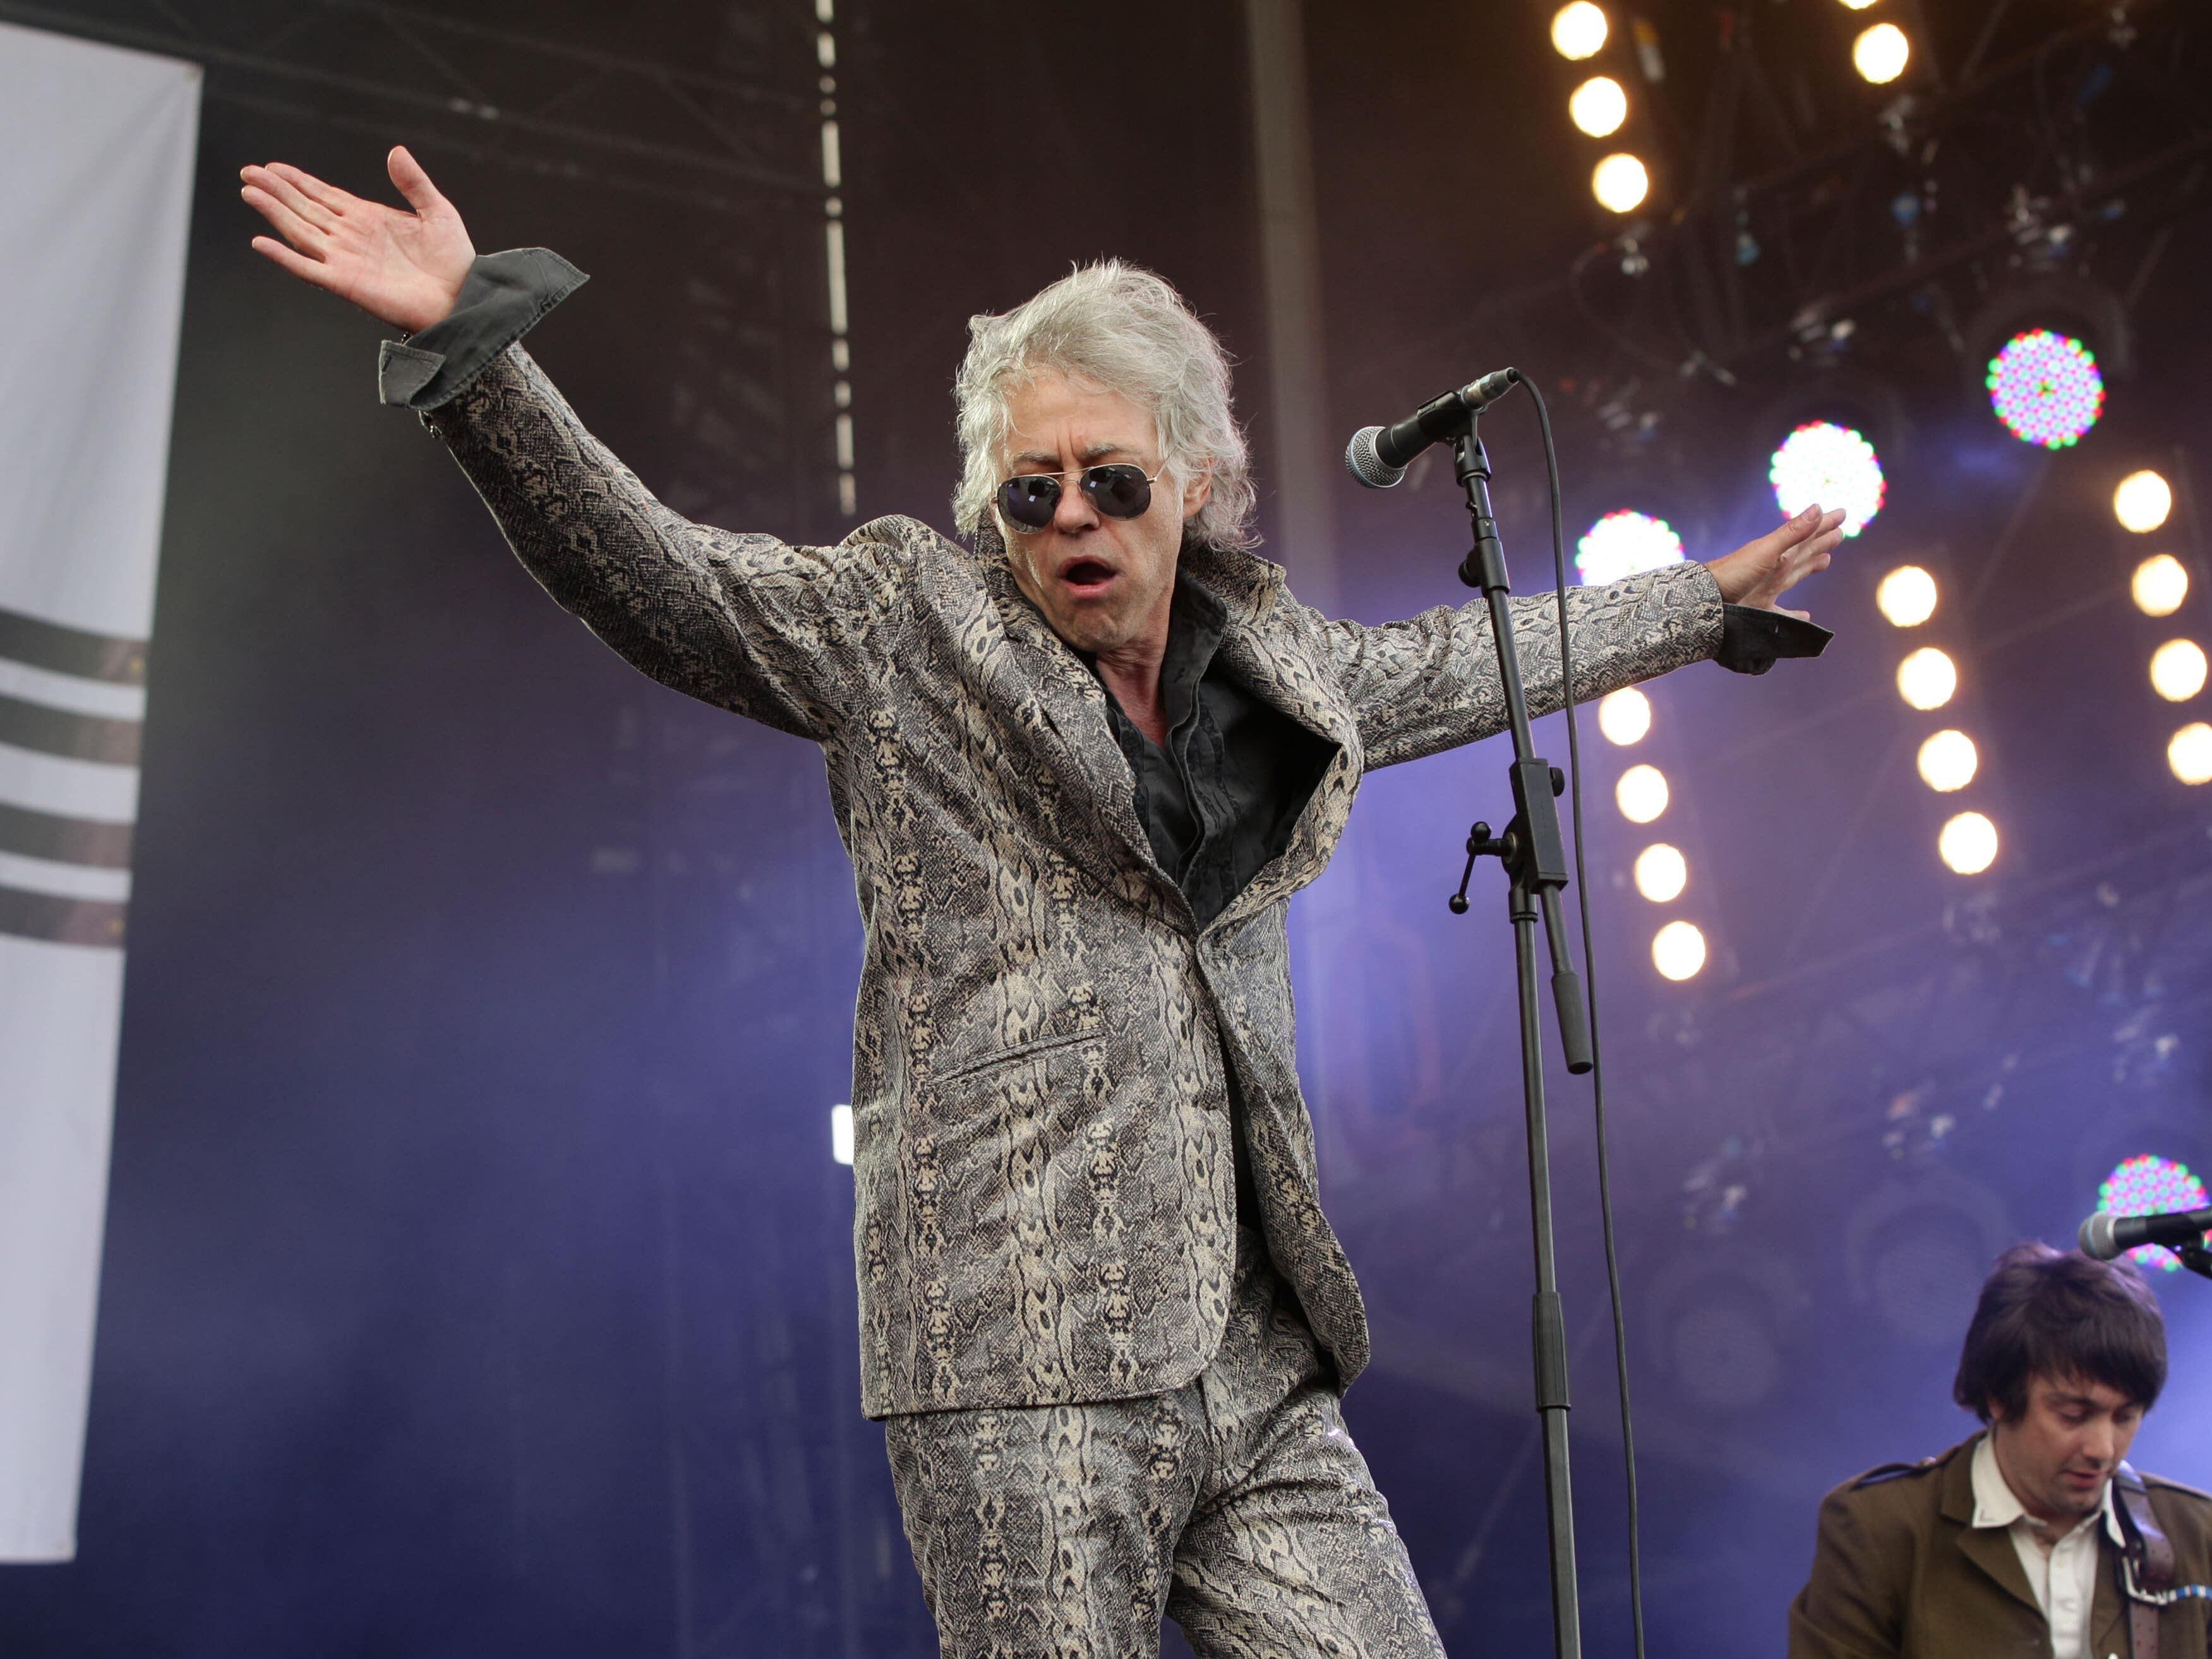 Sir Bob Geldof among line-up for fundraising event in support of Ukraine